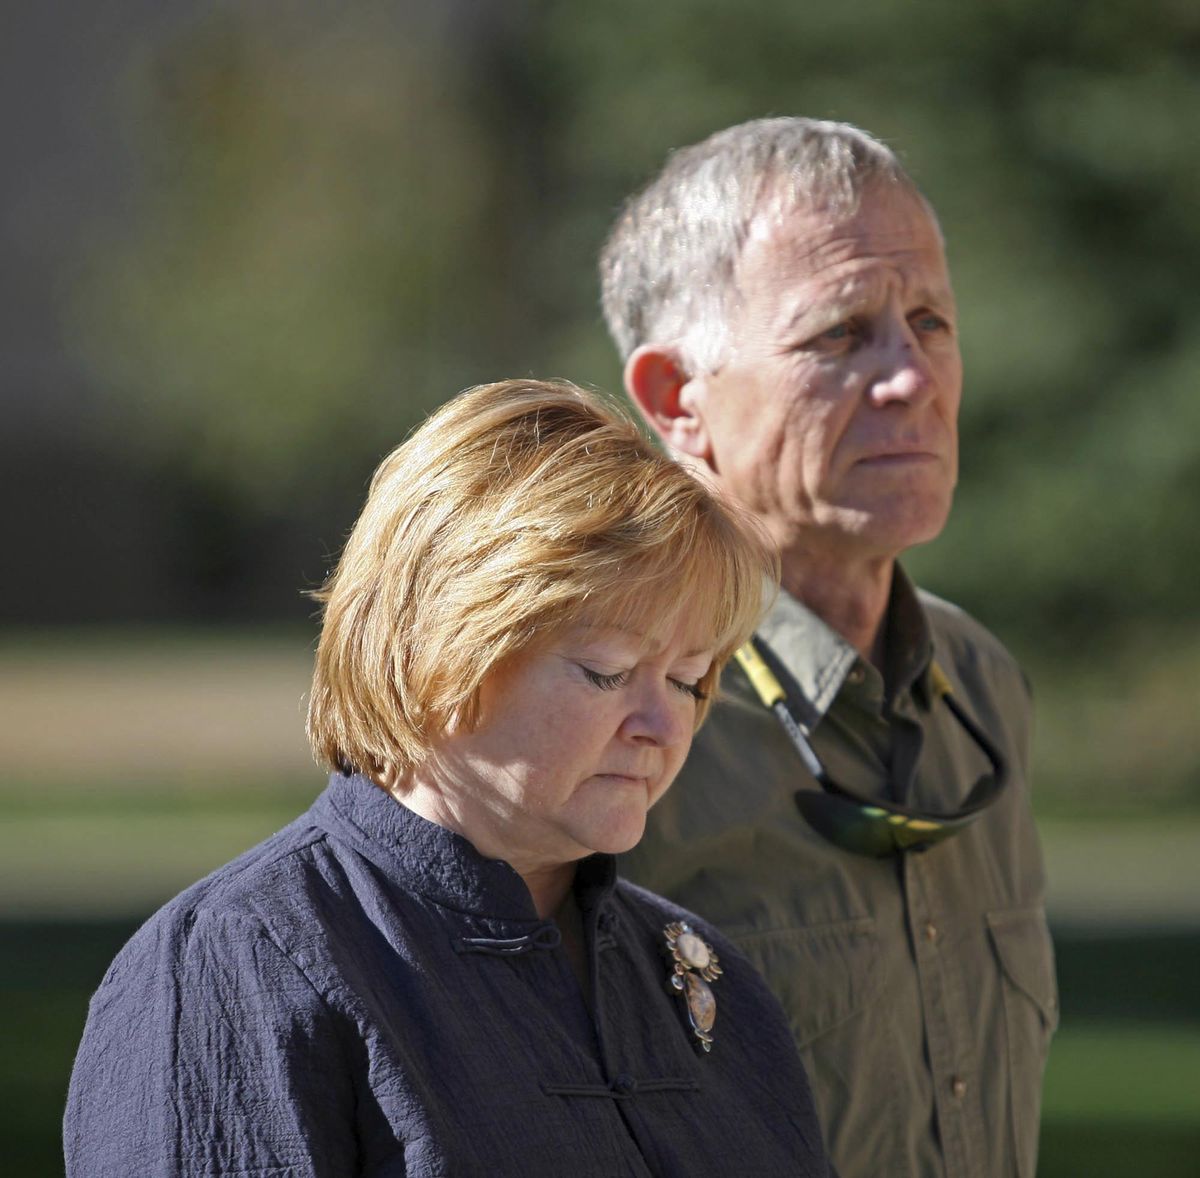 In this Sept. 27, 2008, file photo, Judy and Phillip Shepard, parents of the late Matthew Shepard, listen to University of Wyoming president Tom Buchanan during a dedication of the Matthew Shepard Memorial Bench in Laramie, Wyo. The ashes of Matthew Shepard, whose brutal murder in the 1990s became a rallying cry for the gay rights movement, were laid to rest Friday morning, Oct. 26, 2018, in Washington National Cathedral. For Shepard’s remains for 20 years had been kept by his family in Wyoming, where the 21-year-old college student was killed in 1998. (Andy Carpenean / Associated Press)